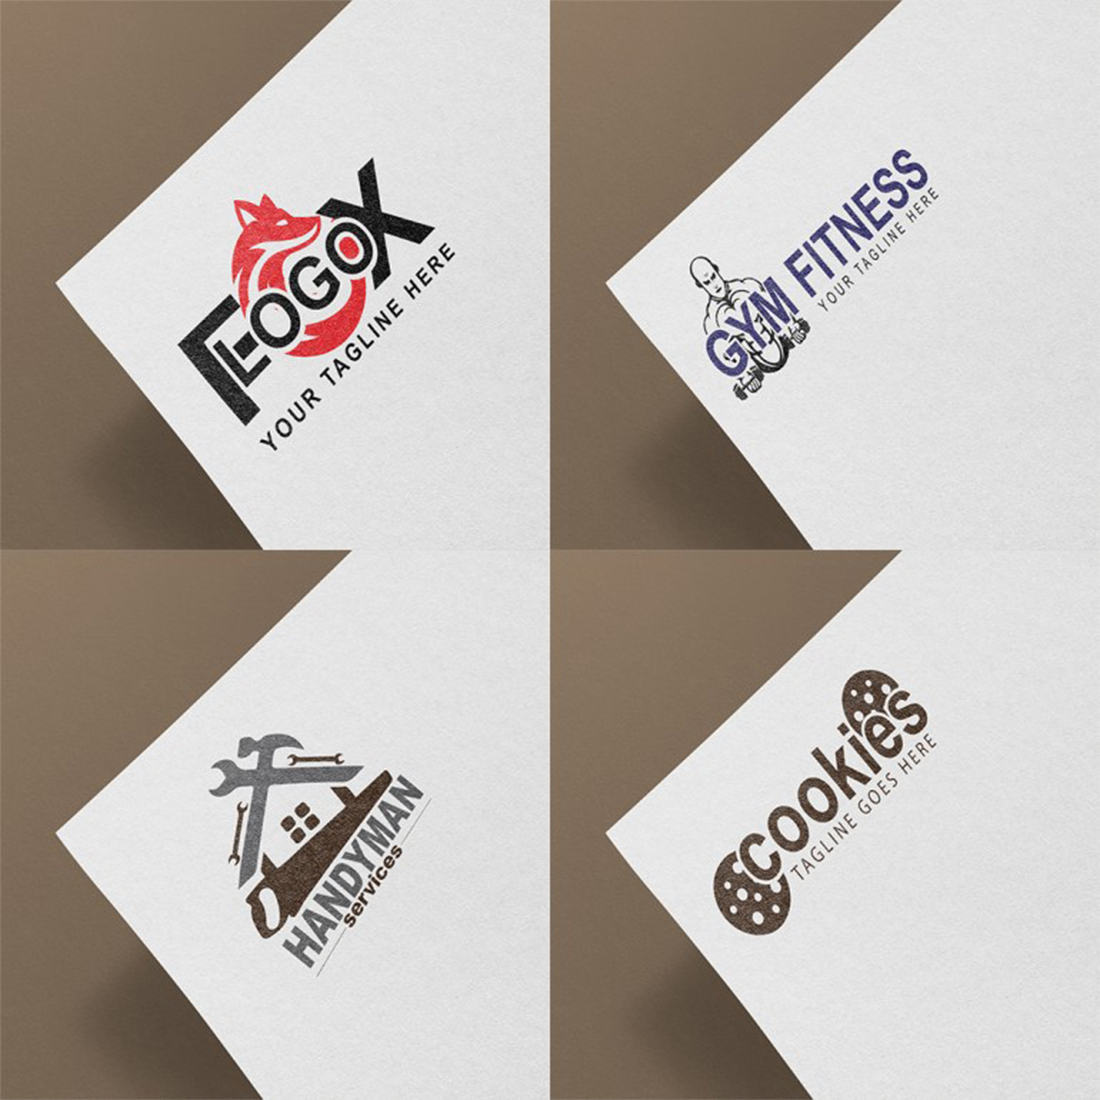 I am selling 4 logos in just $15 cover image.